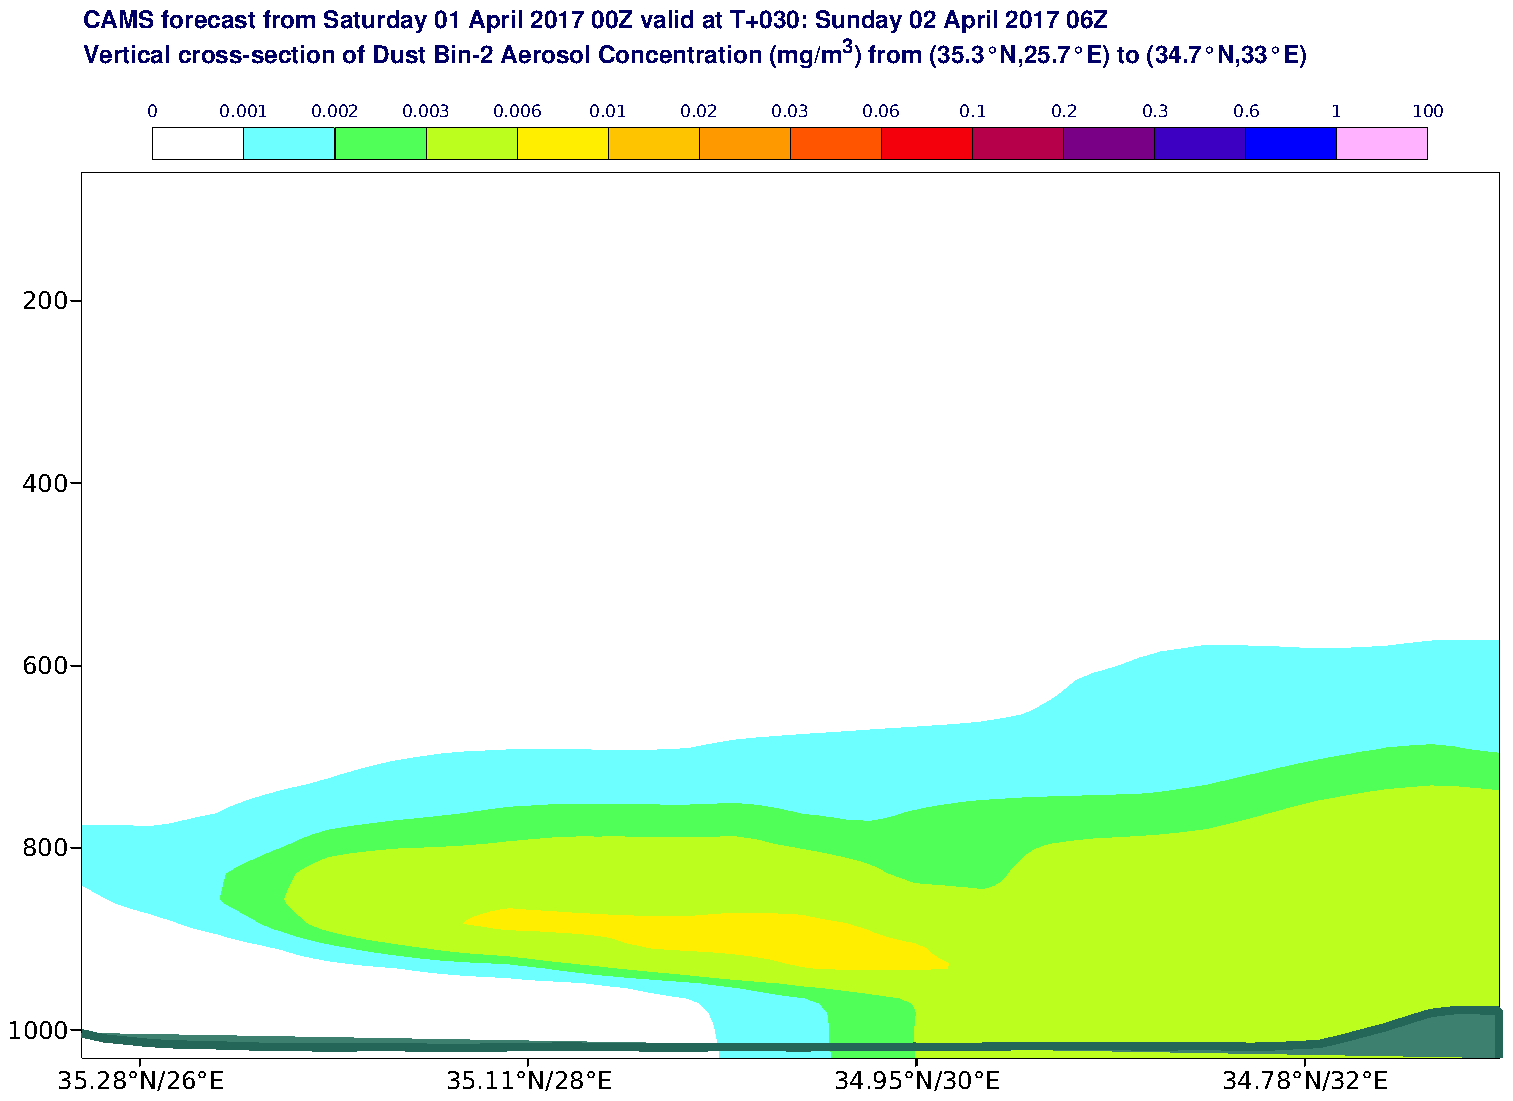 Vertical cross-section of Dust Bin-2 Aerosol Concentration (mg/m3) valid at T30 - 2017-04-02 06:00